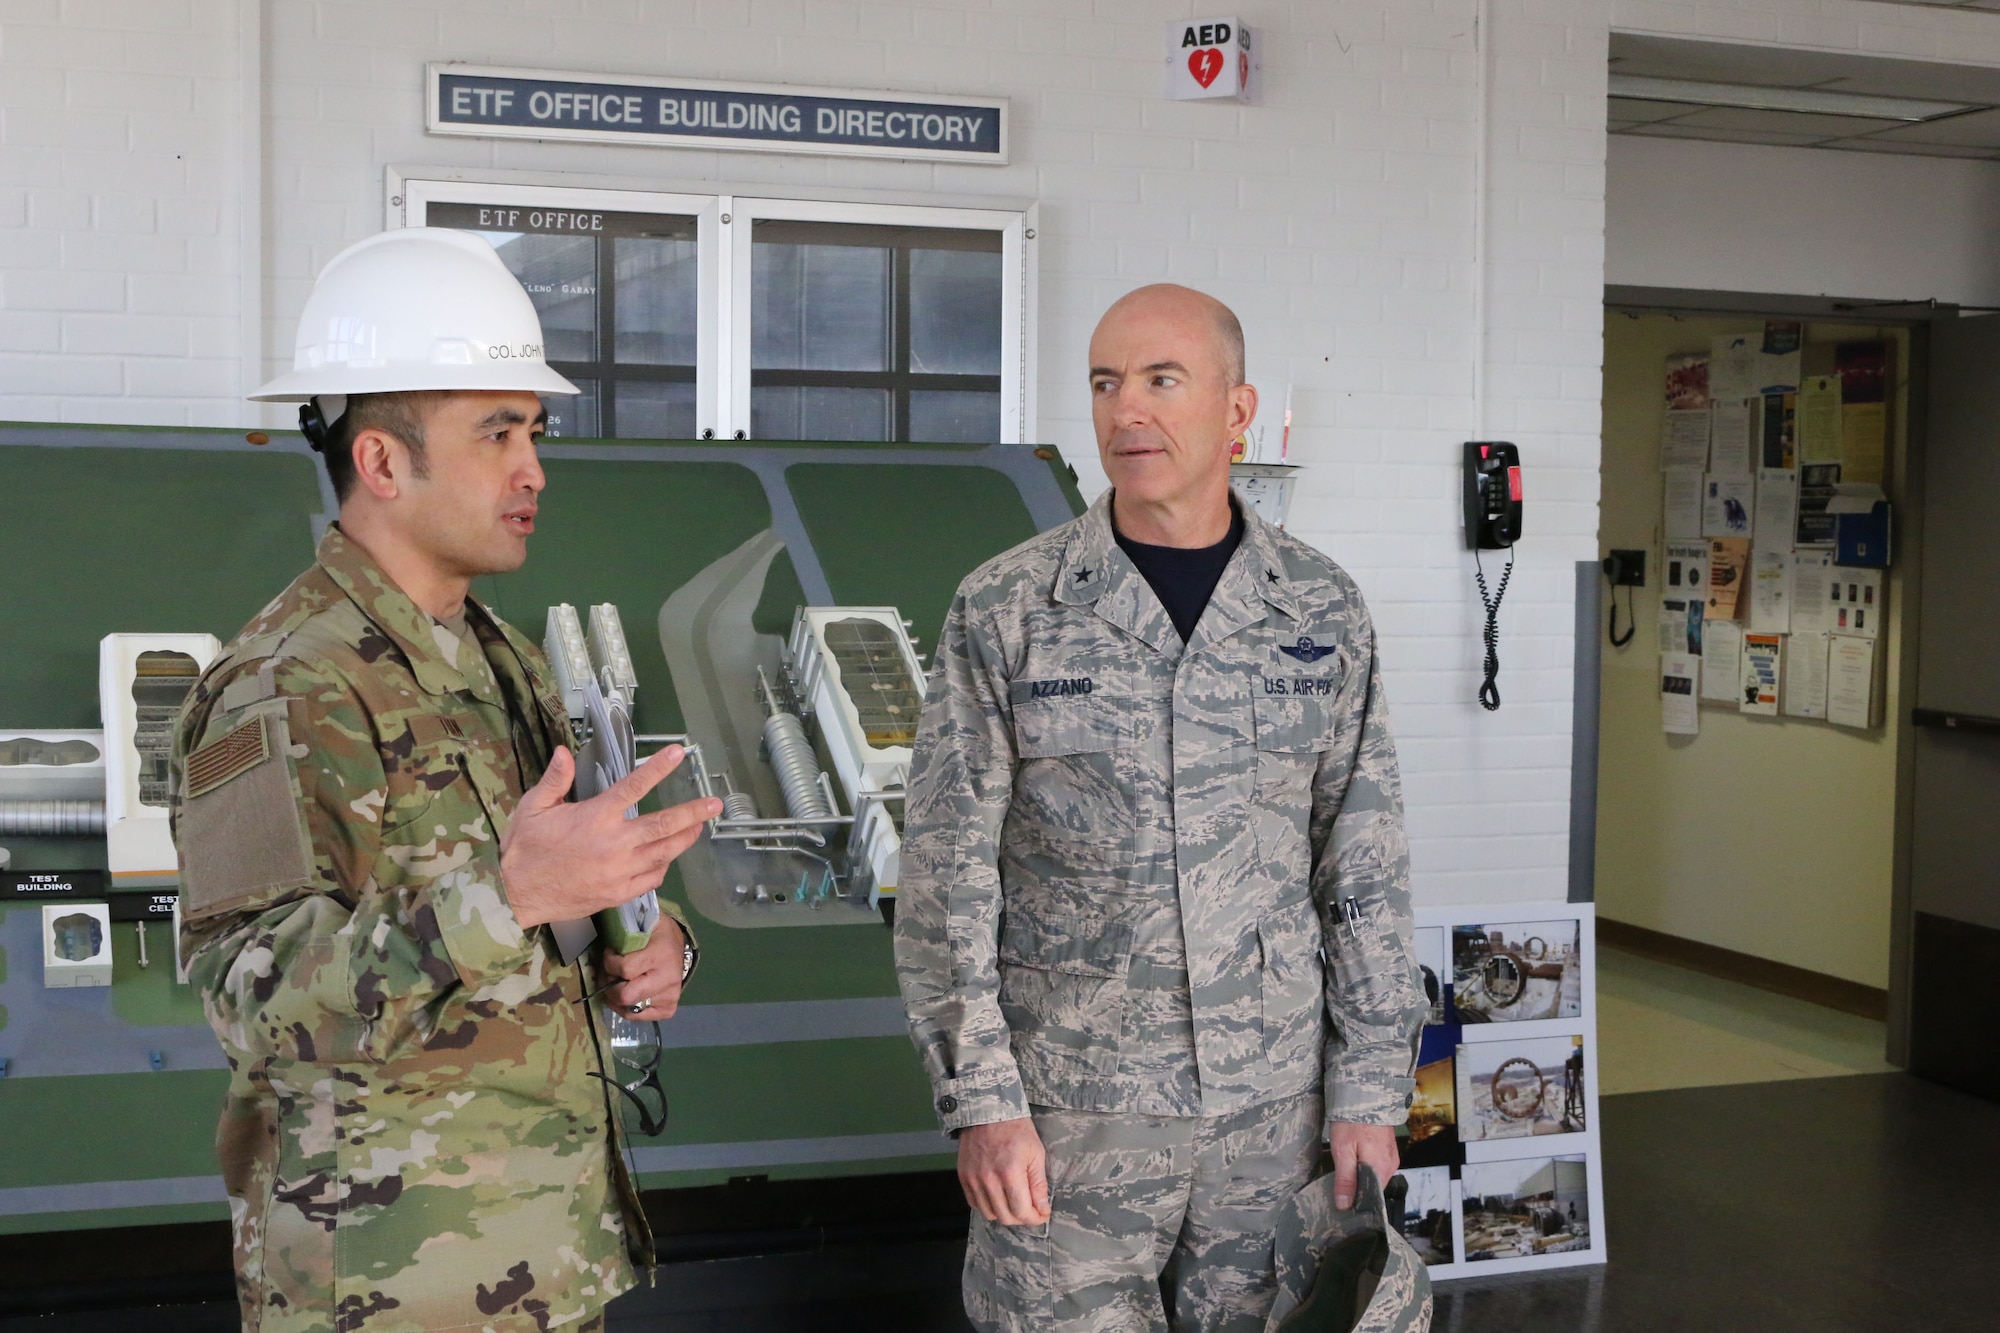 Brig. Gen. Christopher Azzano, commander of the Air Force Test Center, right, is briefed by AEDC Test Systems Sustainment Chief Col. John Tran before his tour of the Engine Test Facility at Arnold Air Force Base. Azzano and other AFTC leadership visited Arnold Air Force Base in mid-November to take part in the 2018 AFTC Strategic Offsite, Azzano’s first offsite since assuming the role of AFTC commander in August. (U.S. Air Force photo by Brad Hicks) (This image was altered by obscuring badges for security purposes)